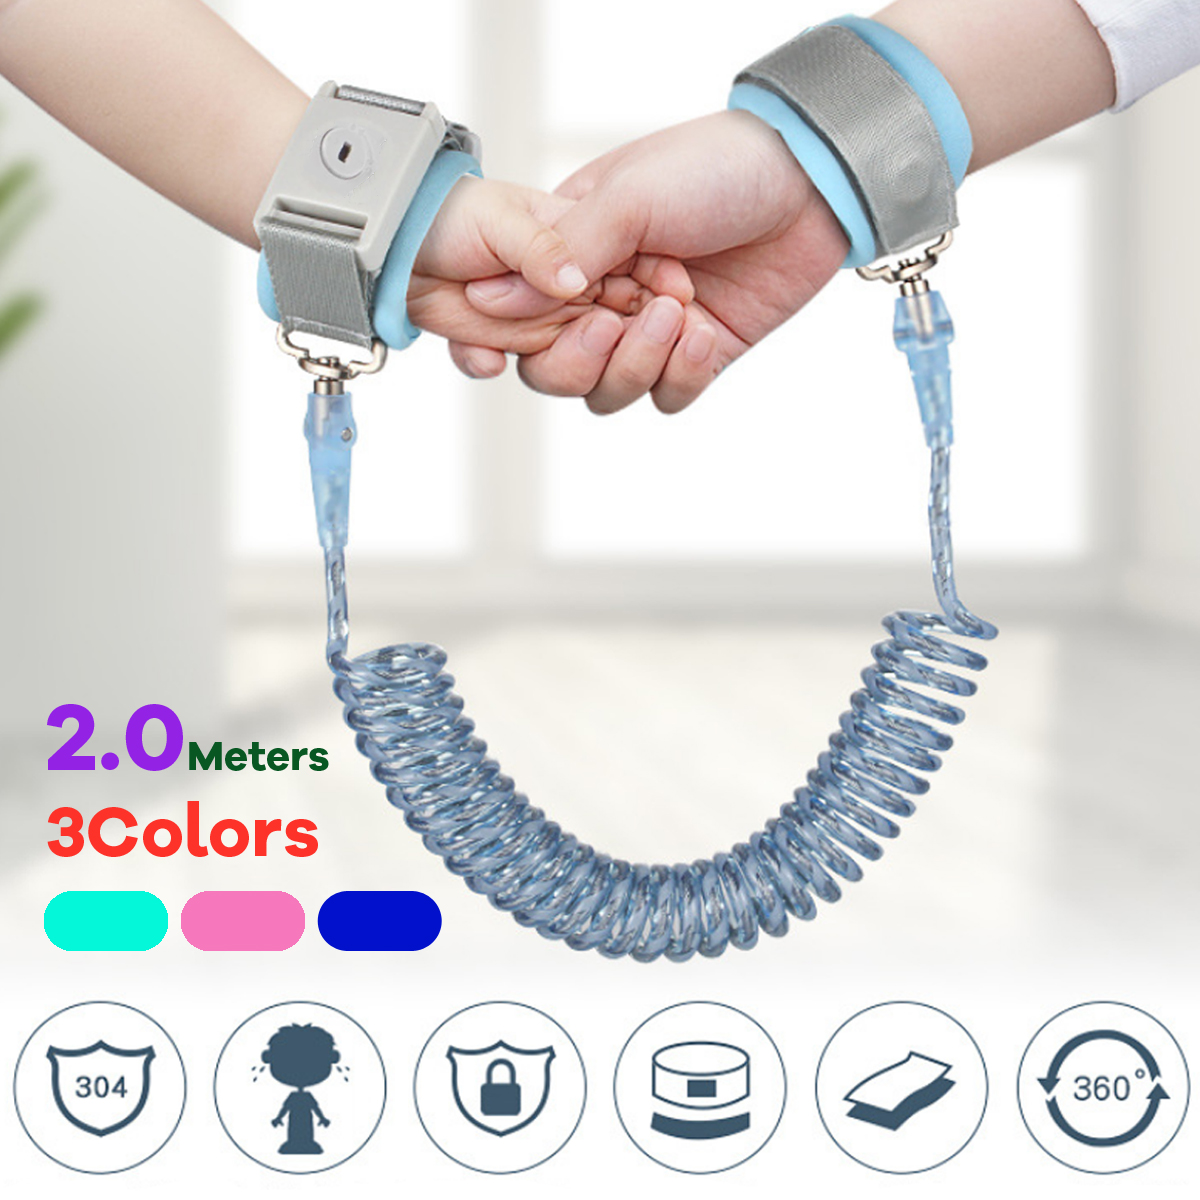 2m-Children-Anti-Lost-Wrist-Link-Safety-Harness-Adjustable-Traction-Rope-Toddler-Kids-Baby-Wristband-1815714-1